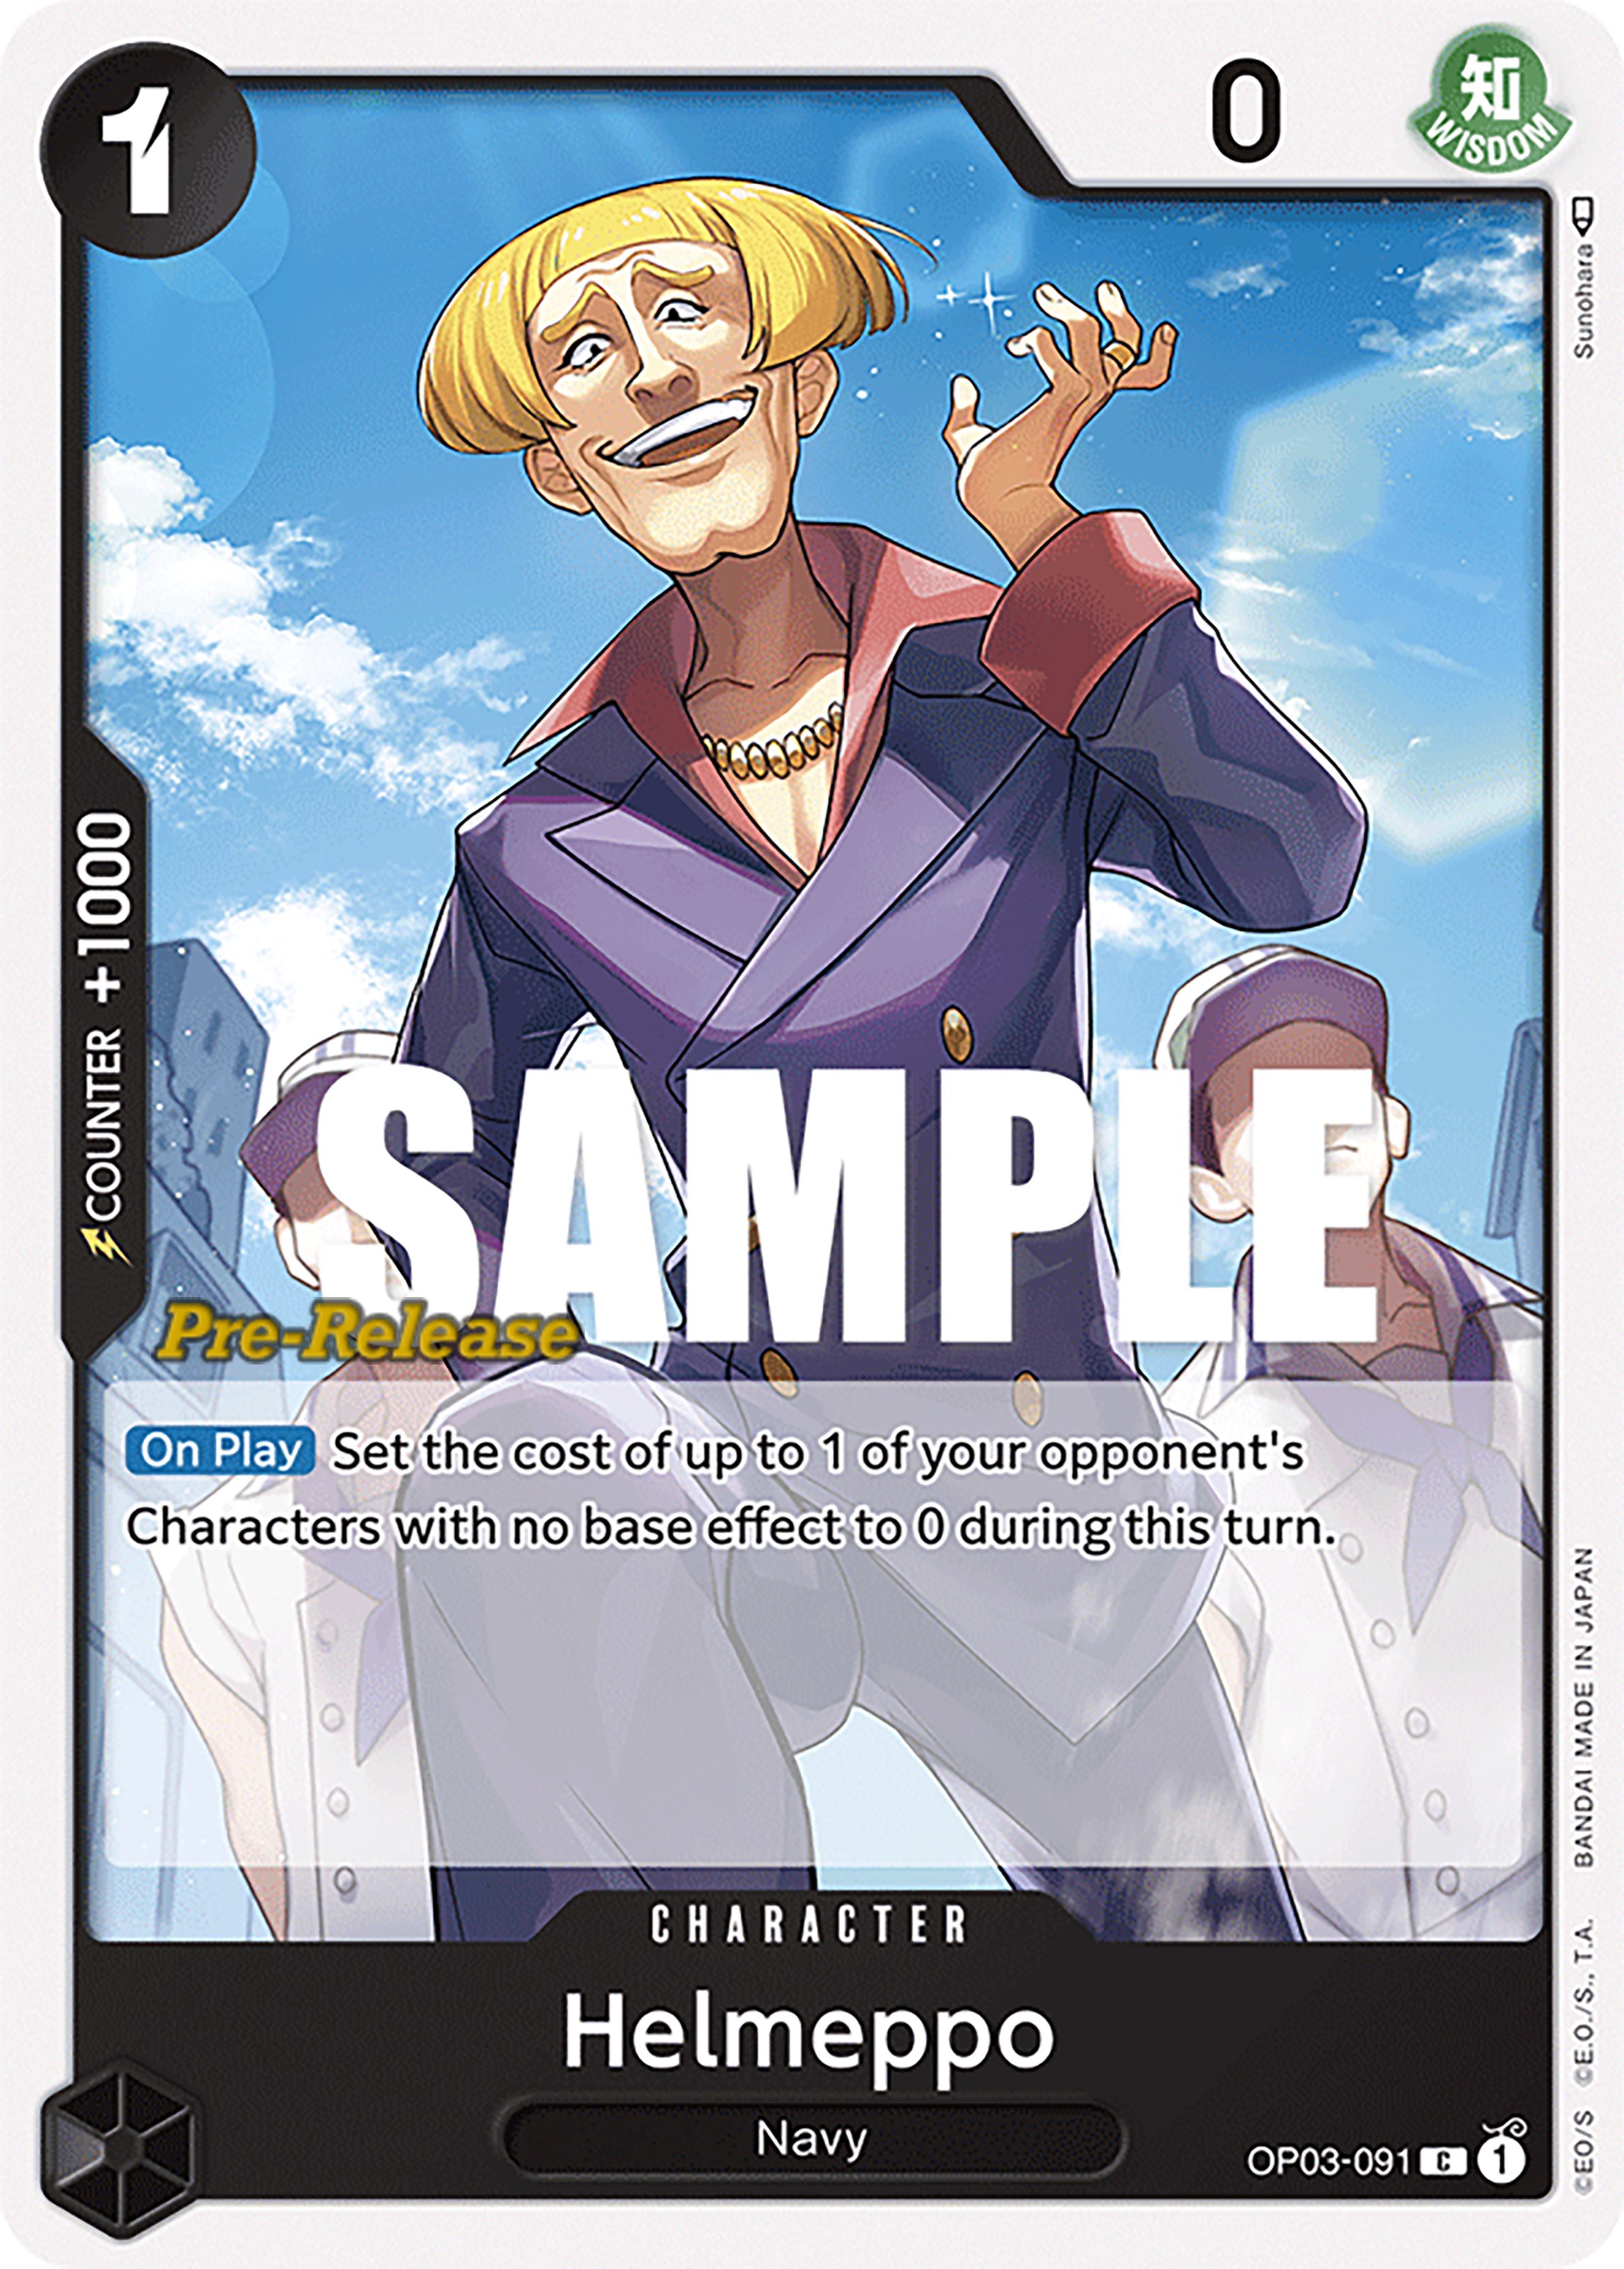 Helmeppo - Pillars of Strength Pre-Release Cards - One Piece Card Game